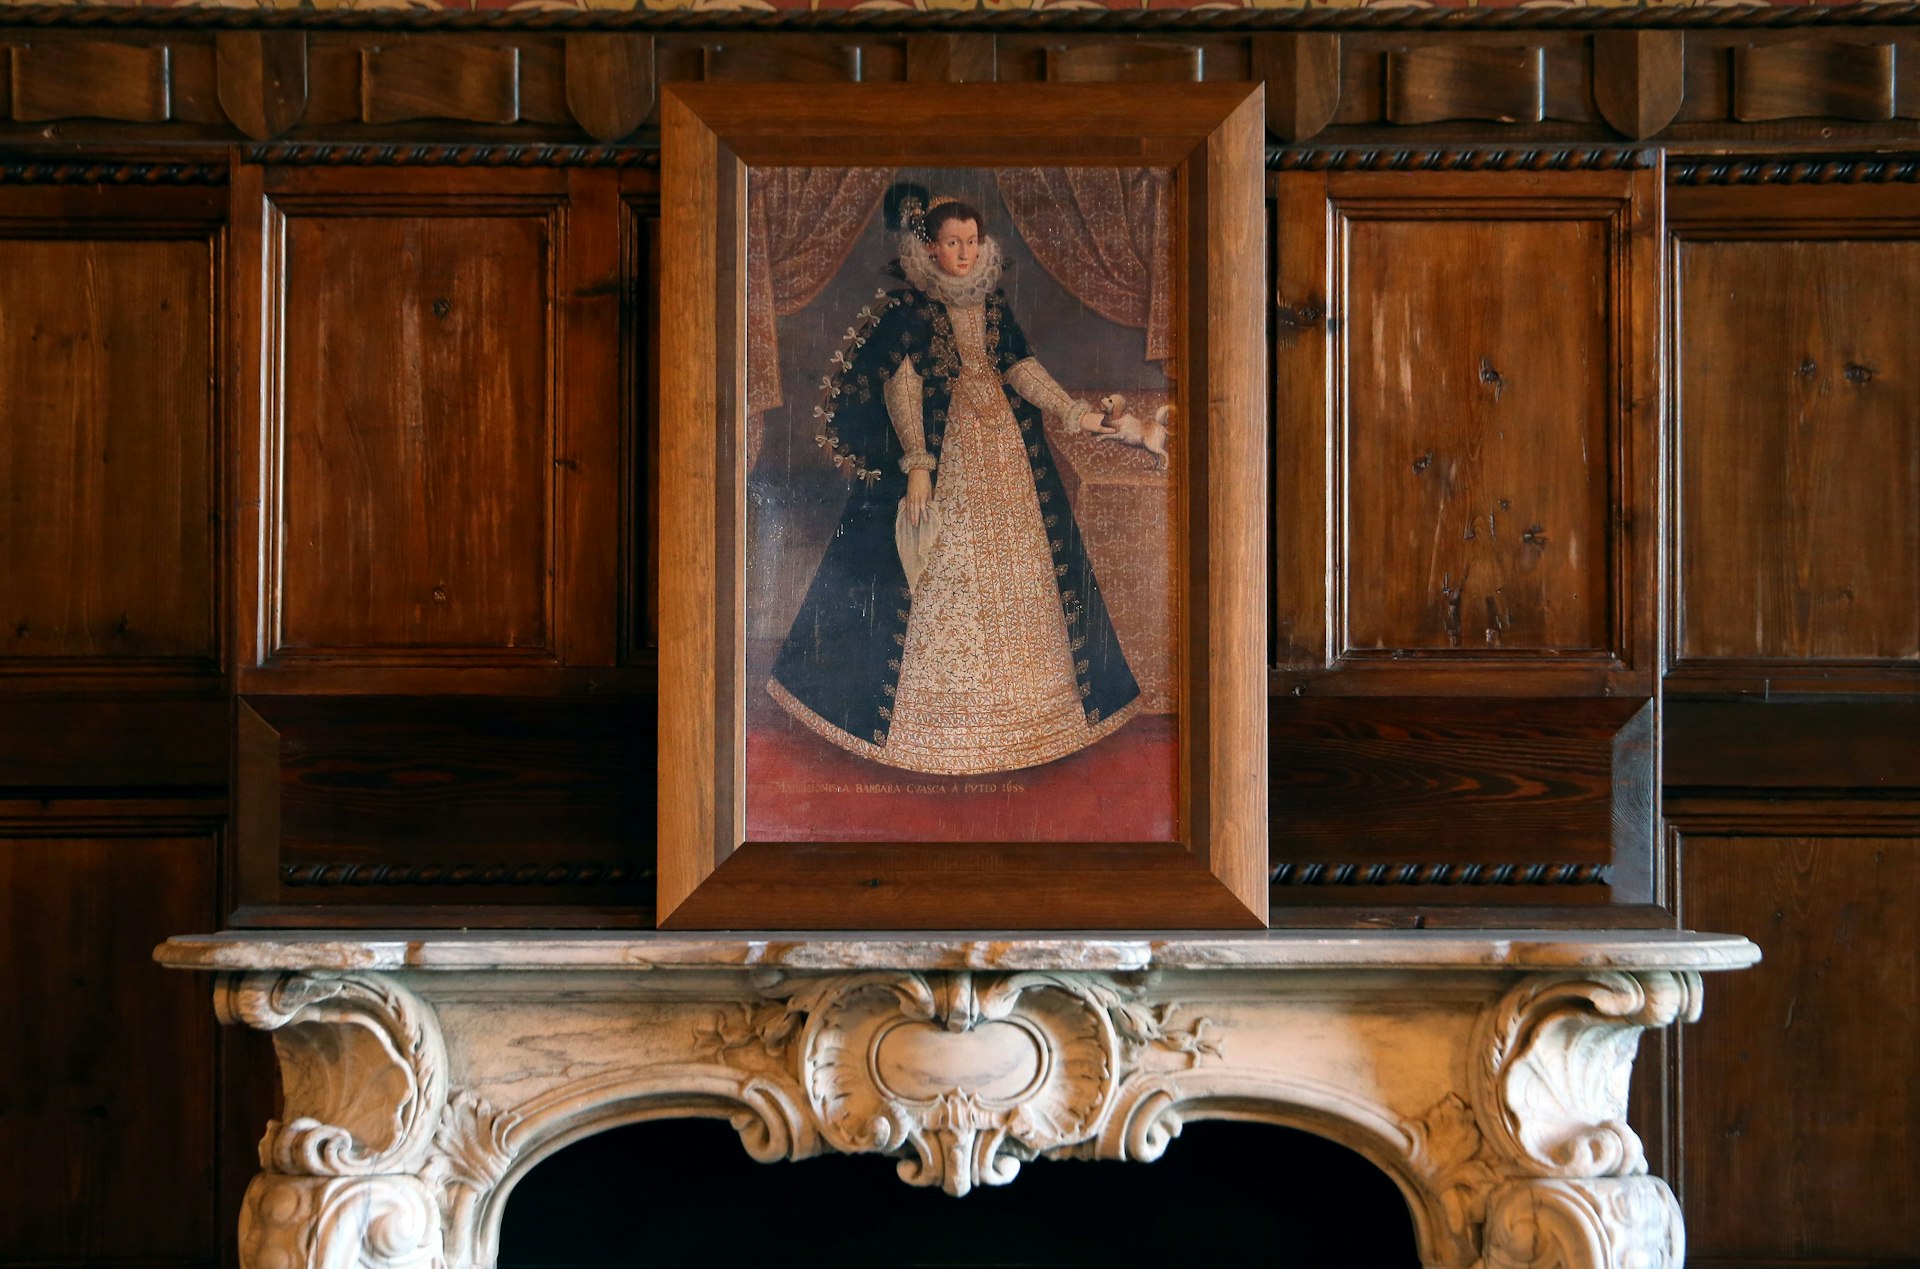 A Renaissance style portrait of Barbara, the ghost said to be hunting the castle